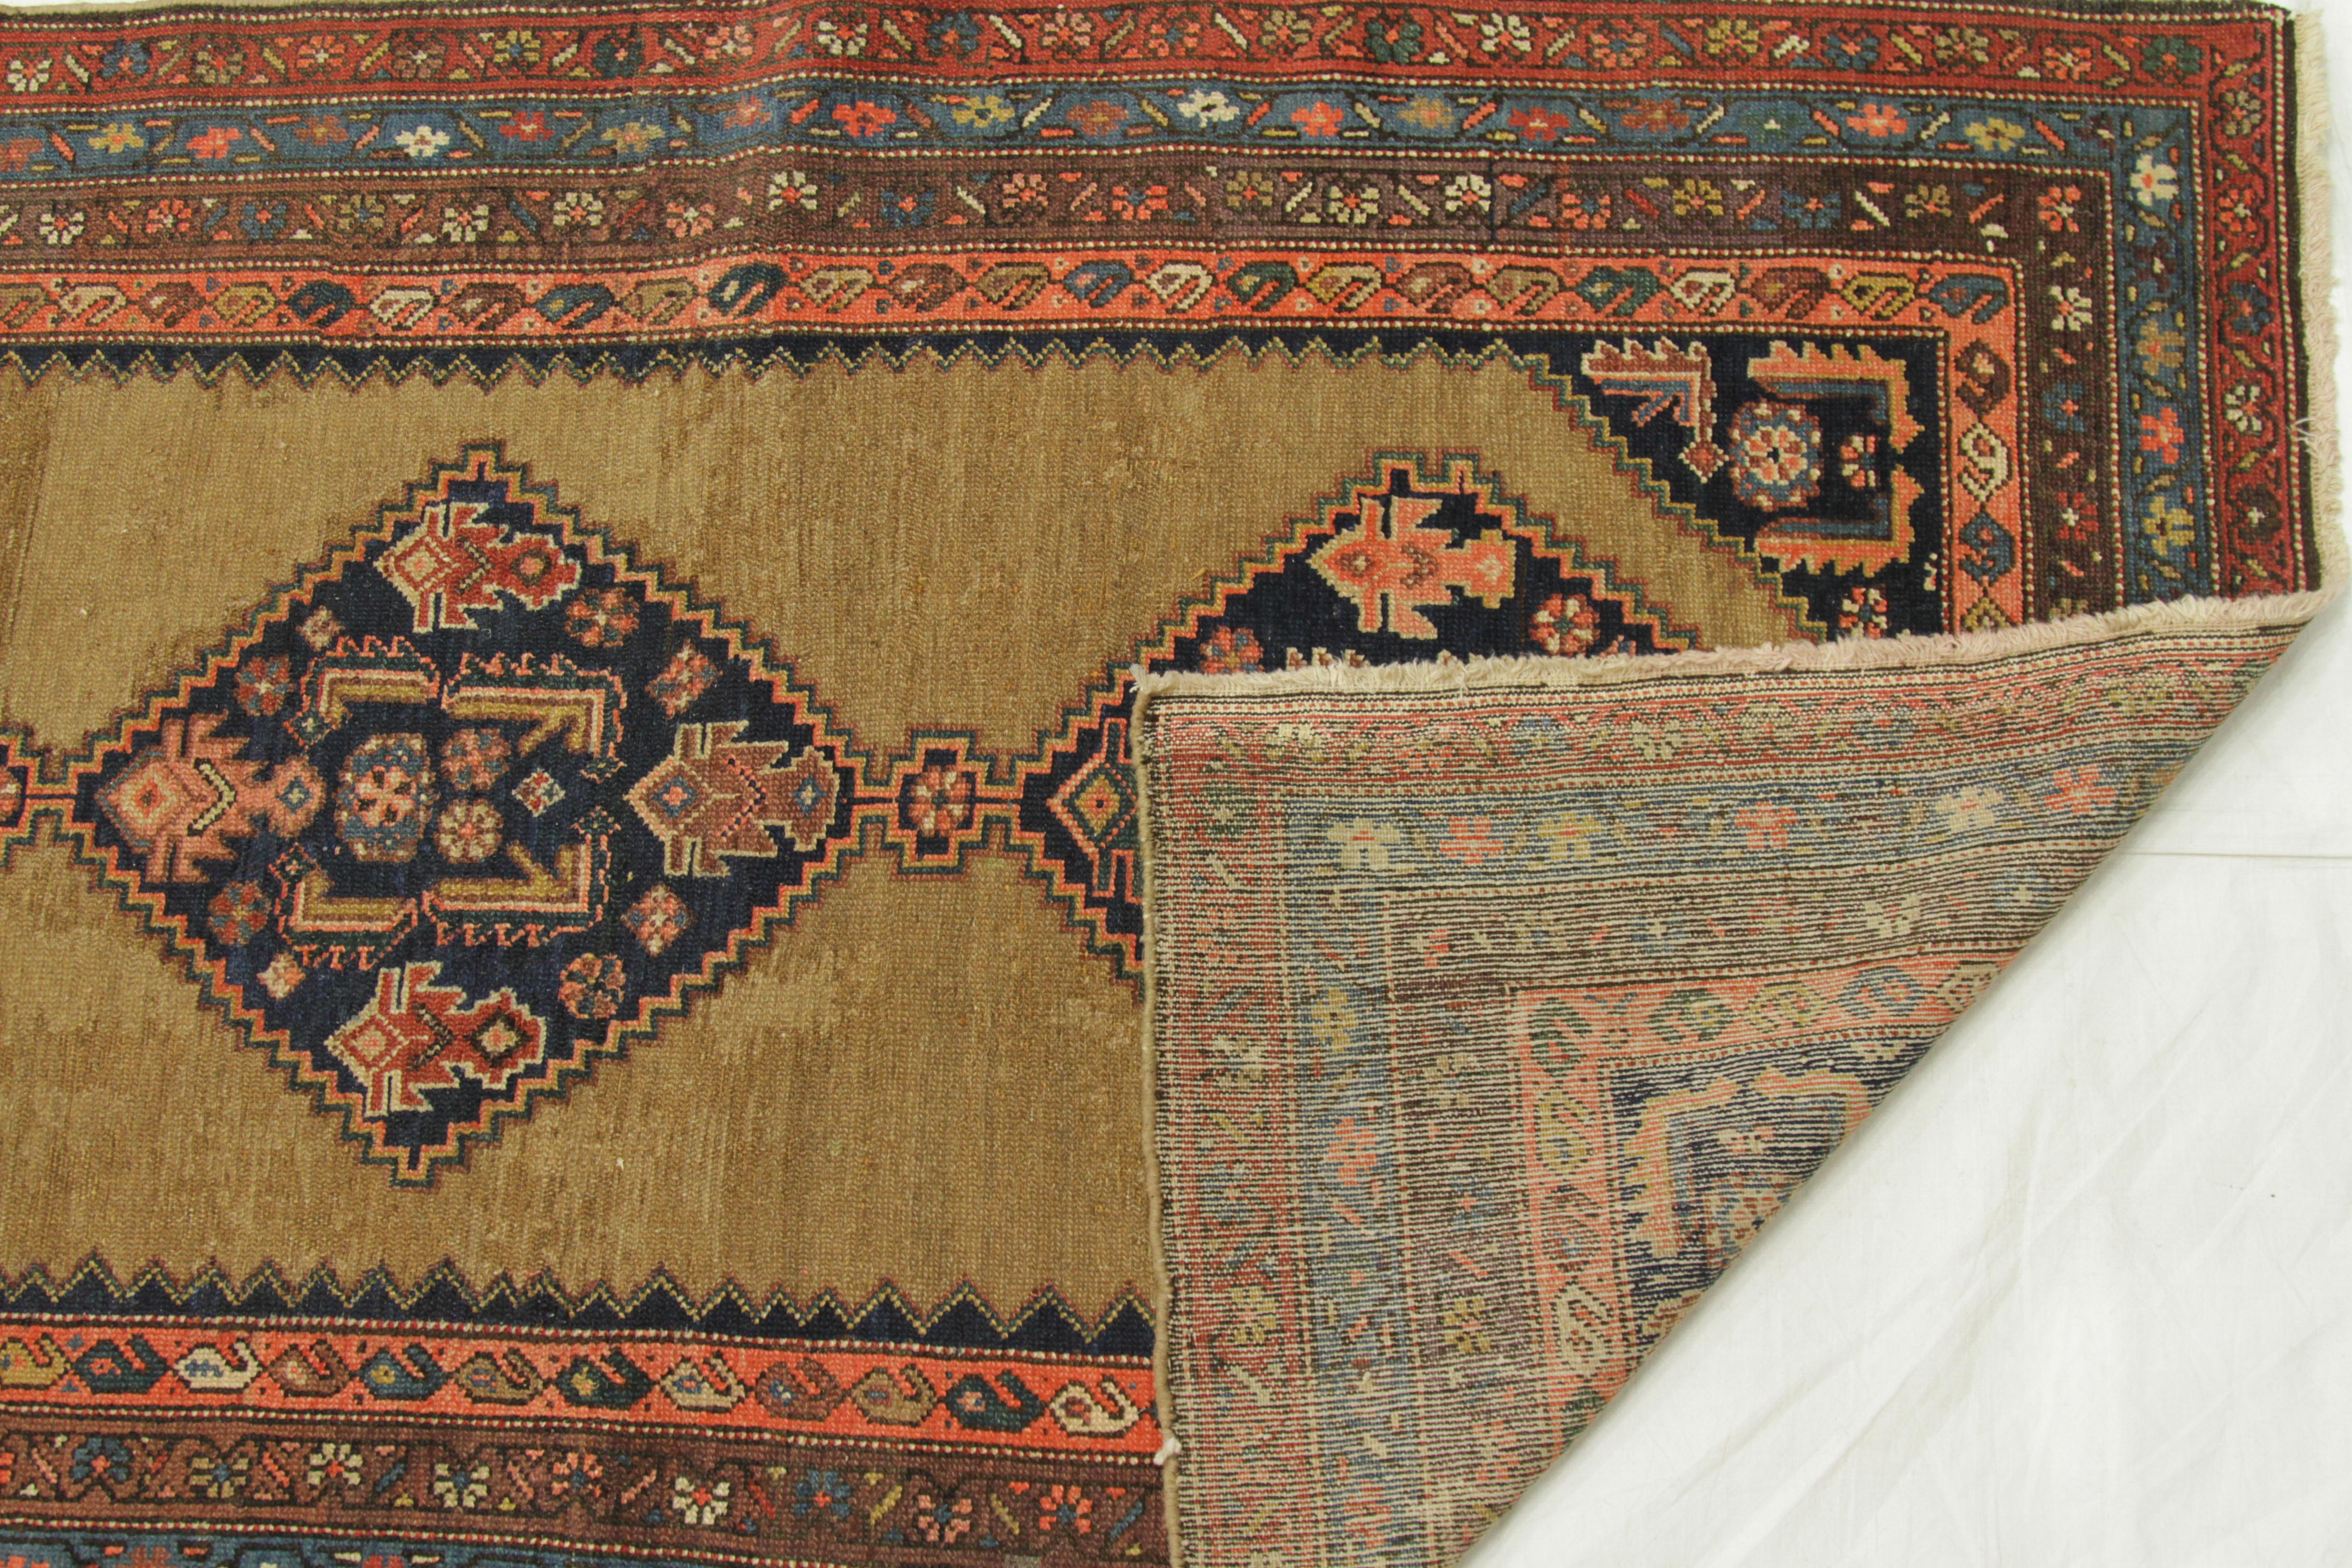 Antique Persian Rug Malayer Design with Fine Geometric Patterns, circa 1920s In Excellent Condition For Sale In Dallas, TX